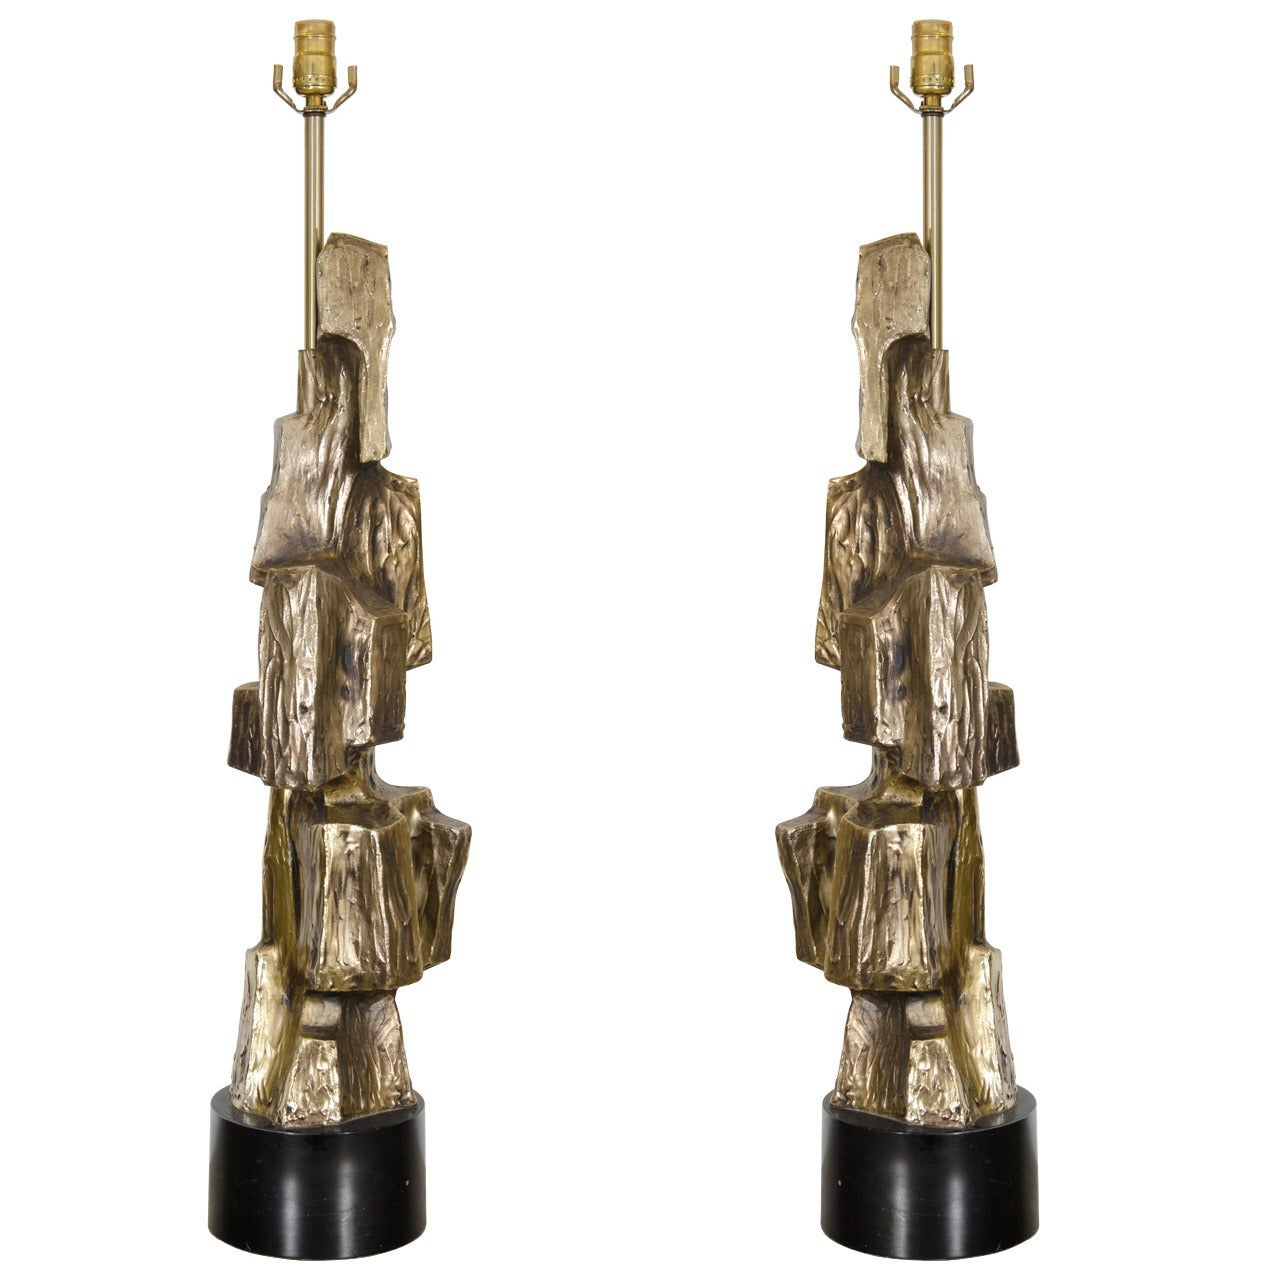 Pair of Brutalist Style Lamps